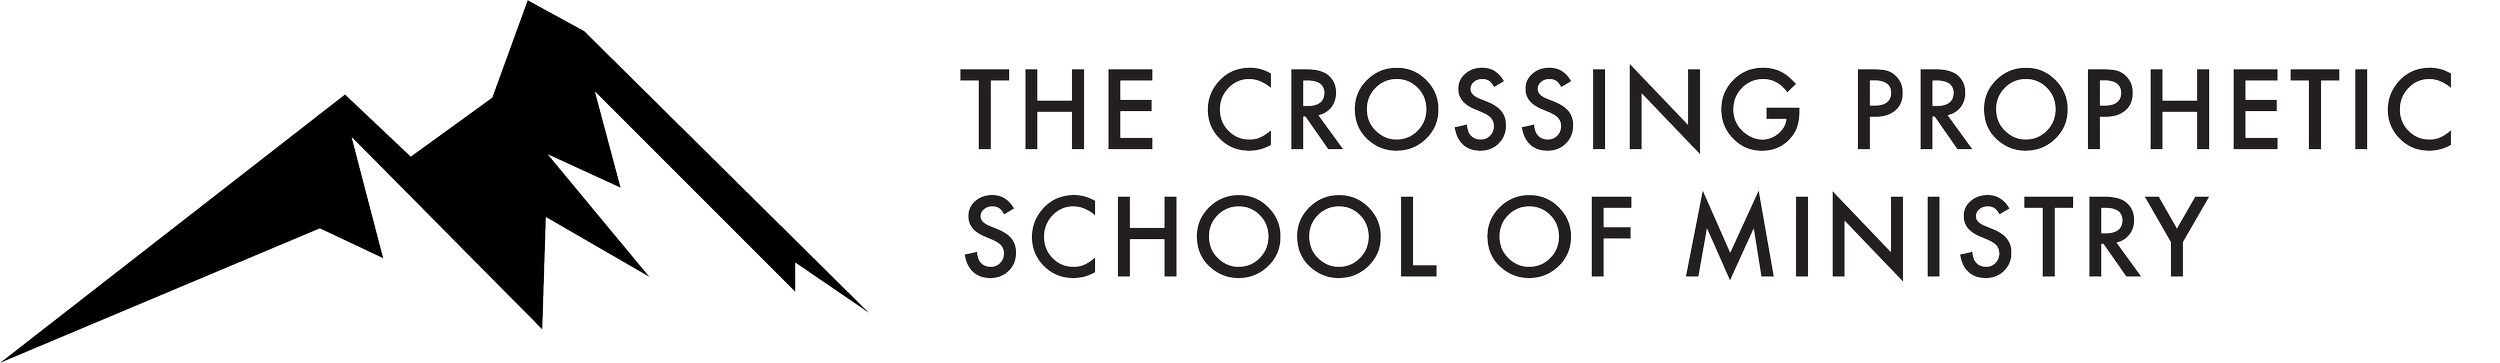 The Crossing Prophetic School of Ministry